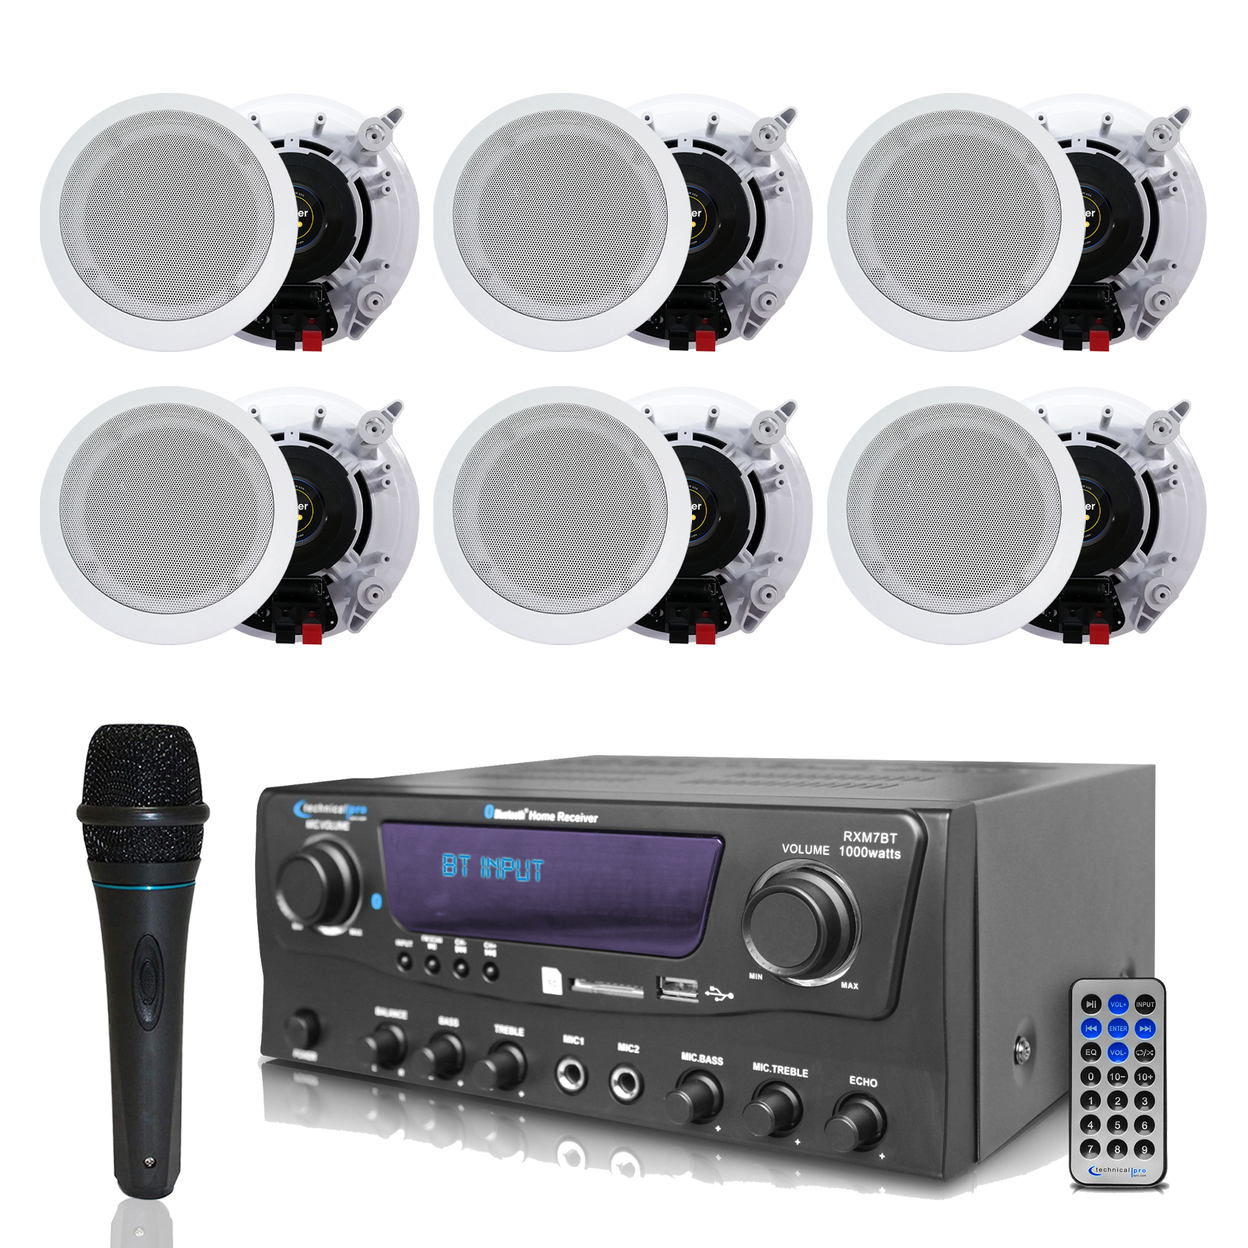 Technical Pro 1000 Watts Professional Bluetooth Receiver With Portable Microphone And (Qty 6) 5.25 Ceiling Wall Mount Frame-less Speakers